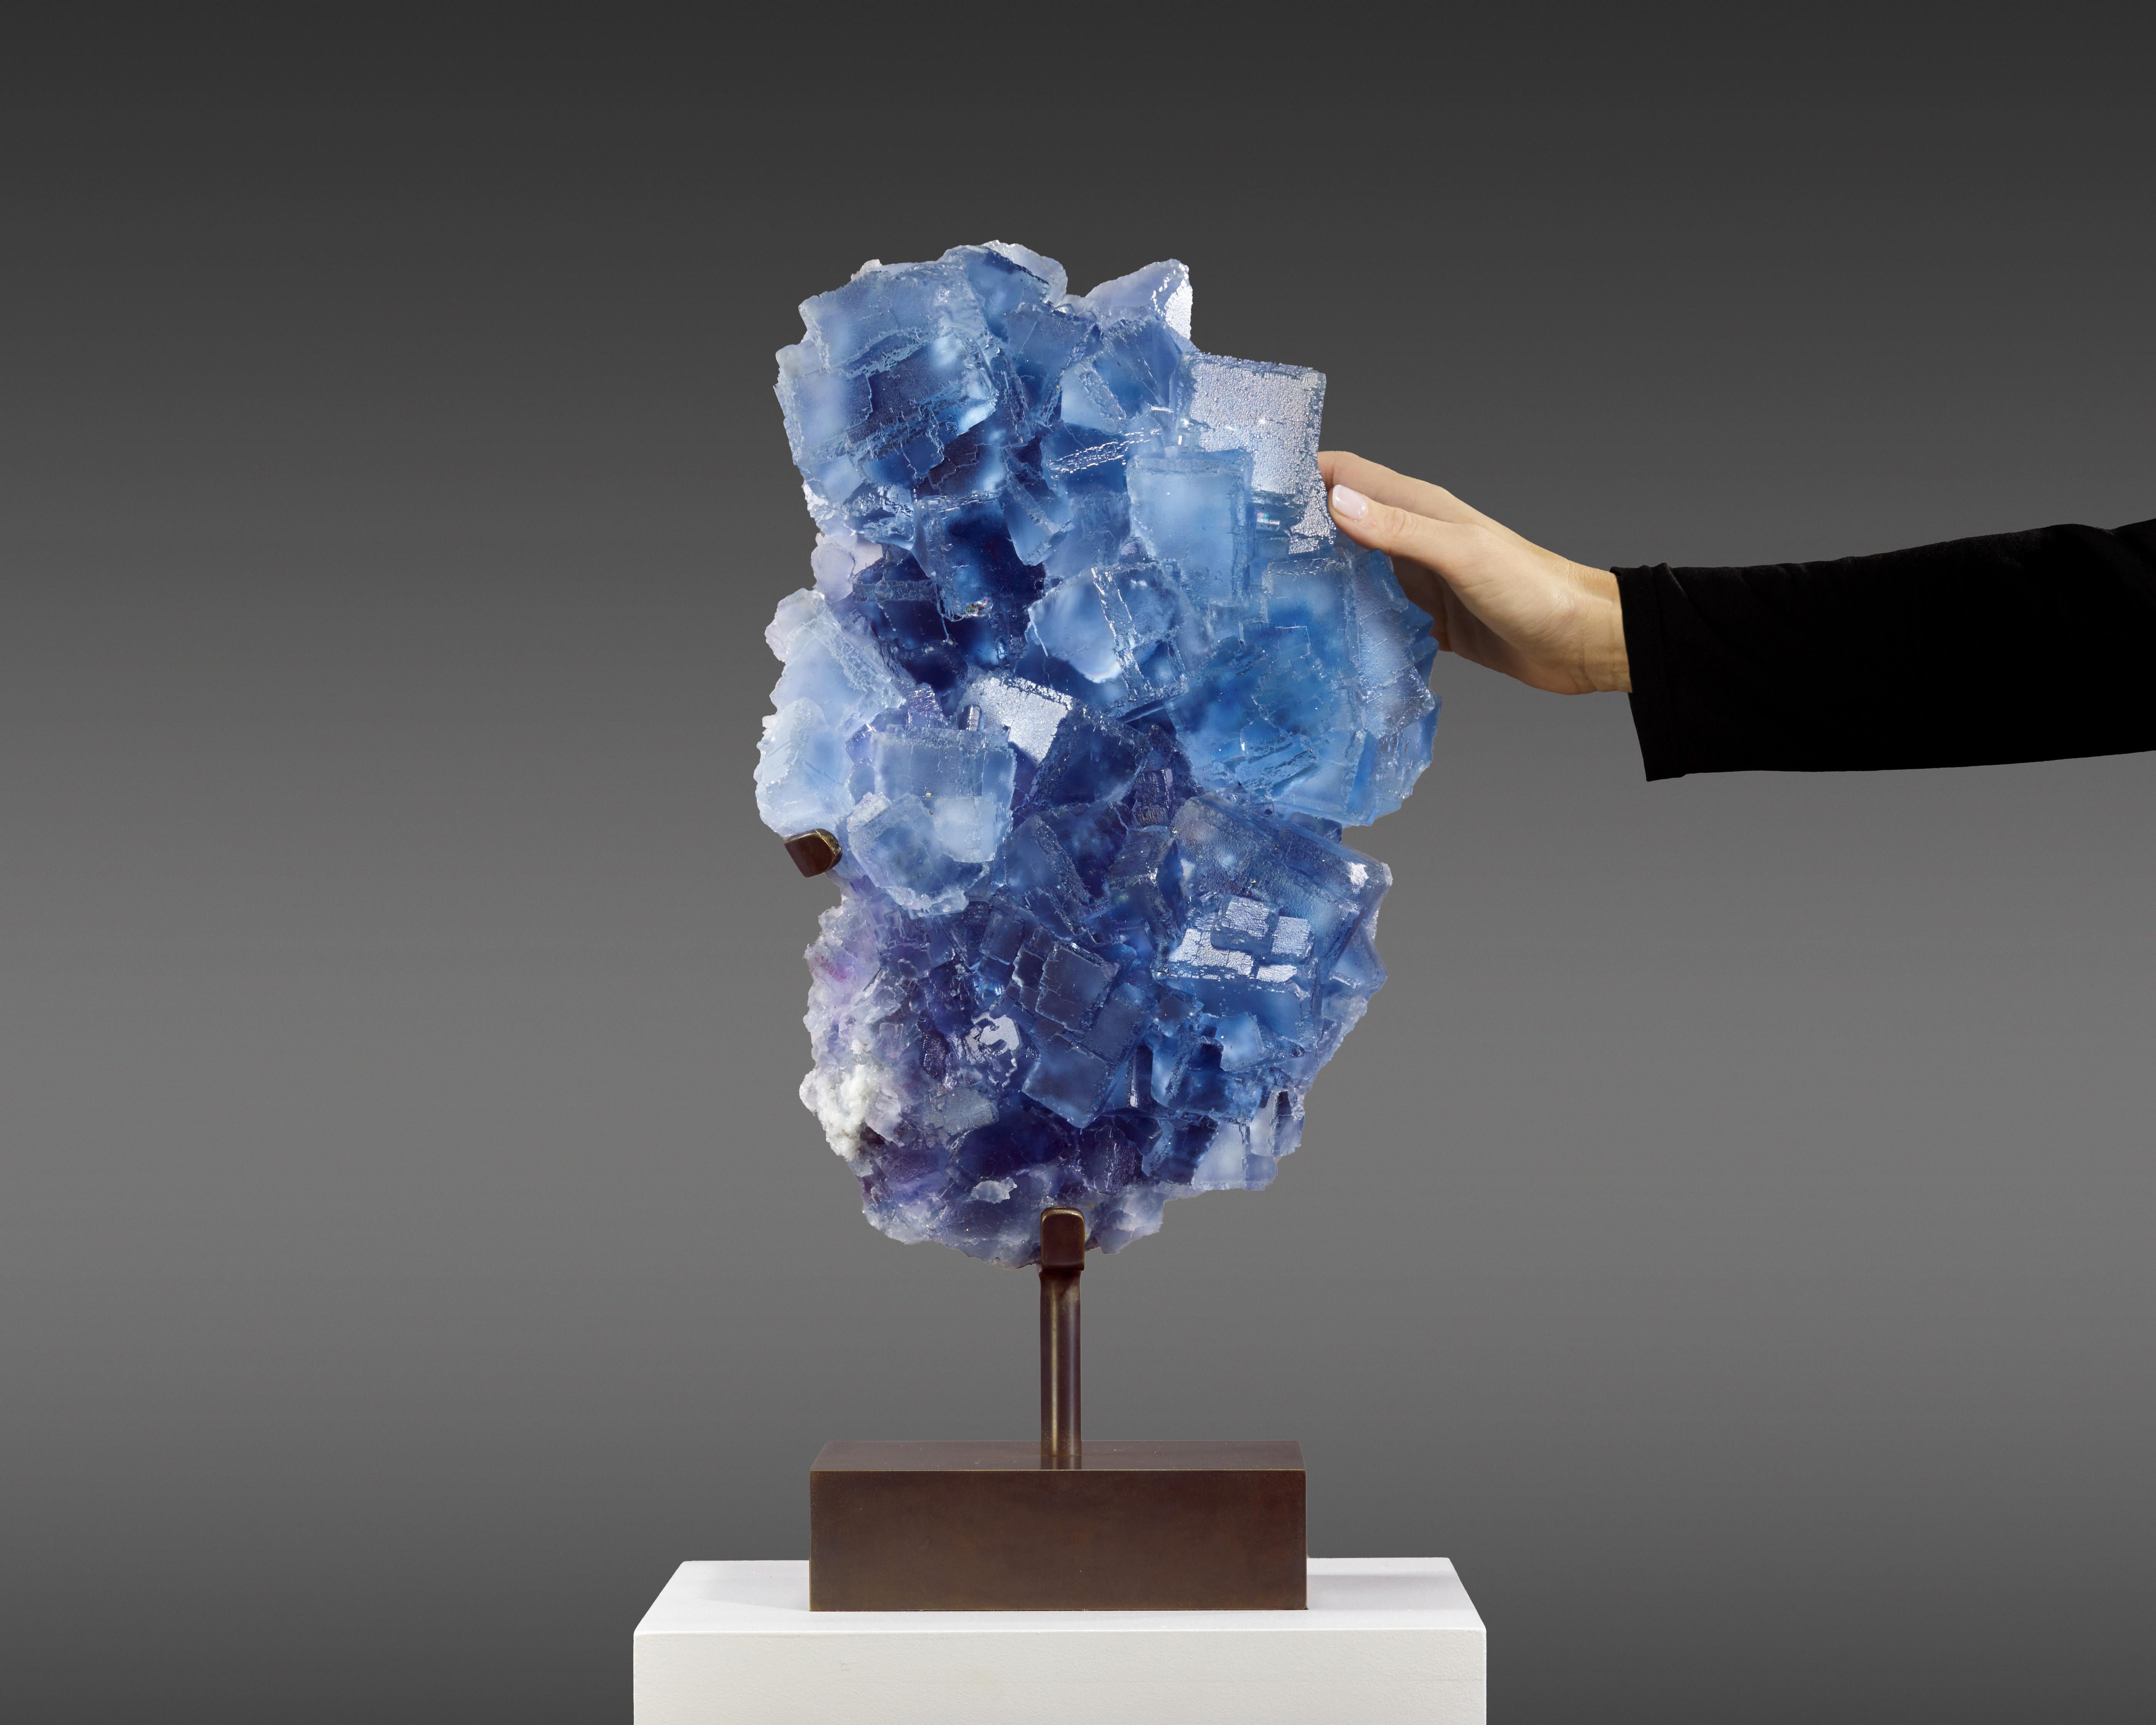 Presented is an exceptional specimen of blue-purple Fluorite,
with a serene light blue hue that evokes the clear sky of a
summer’s day. Originating from the esteemed La Viesca mine in
Asturias, Spain, this piece is graced with enchanting